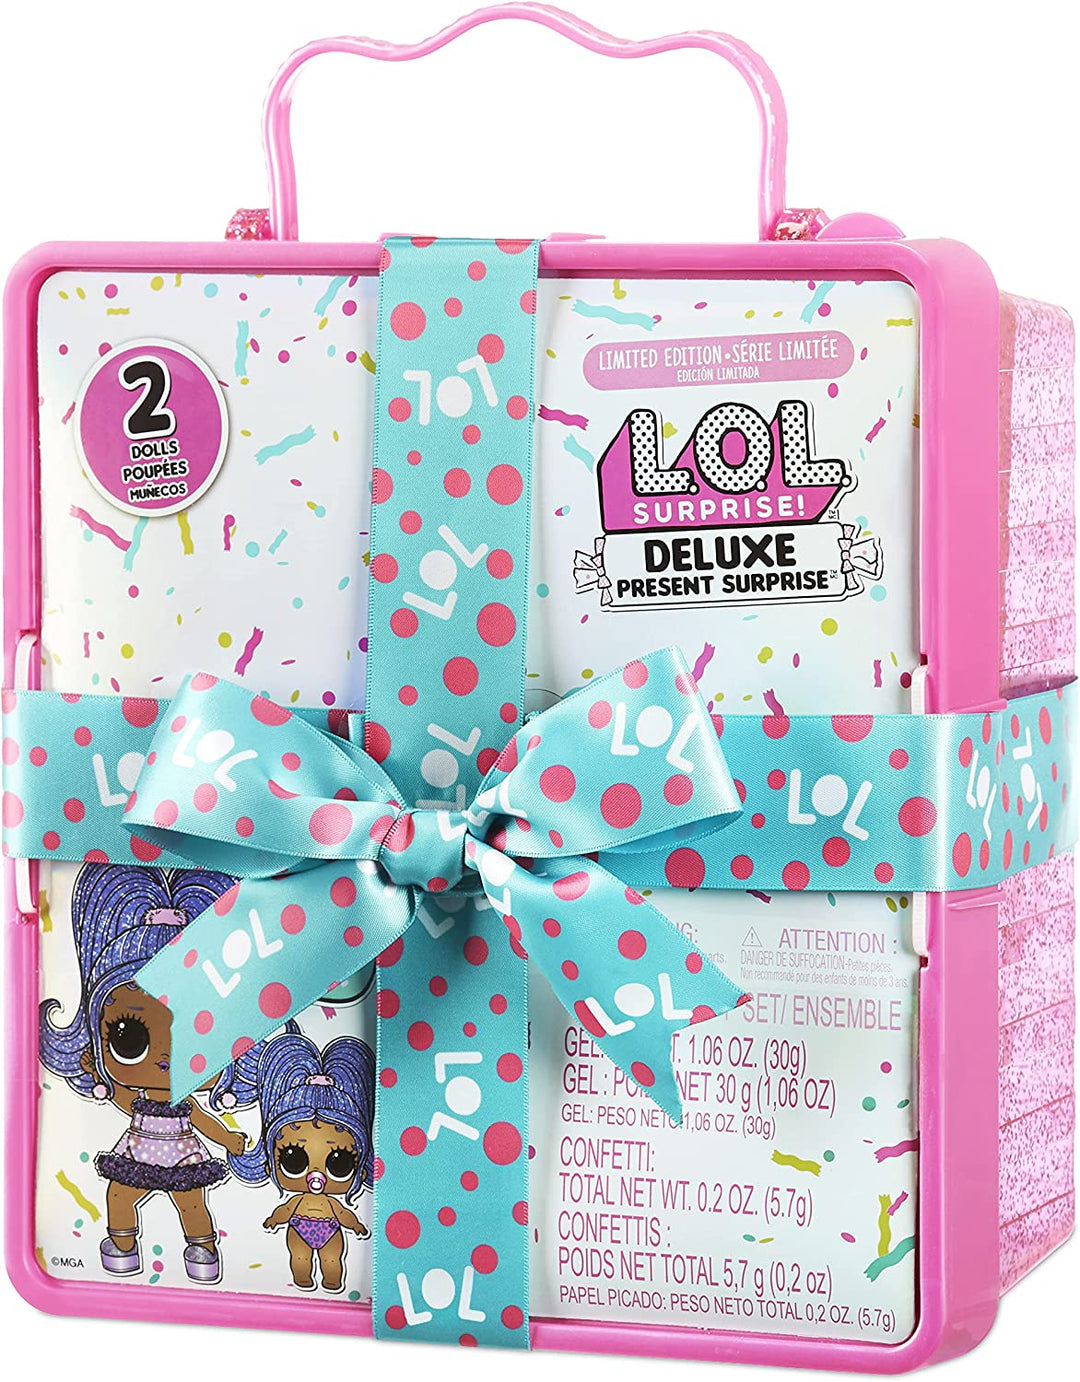 L.O.L. Surprise! Deluxe Present Surprise Toy - Limited Edition Doll & Sister in Party Gift Box Packaging - Includes Surprise Treats, Outfits, Shoes, Confetti, Sand, Colour Change, Water Fizz - Purple